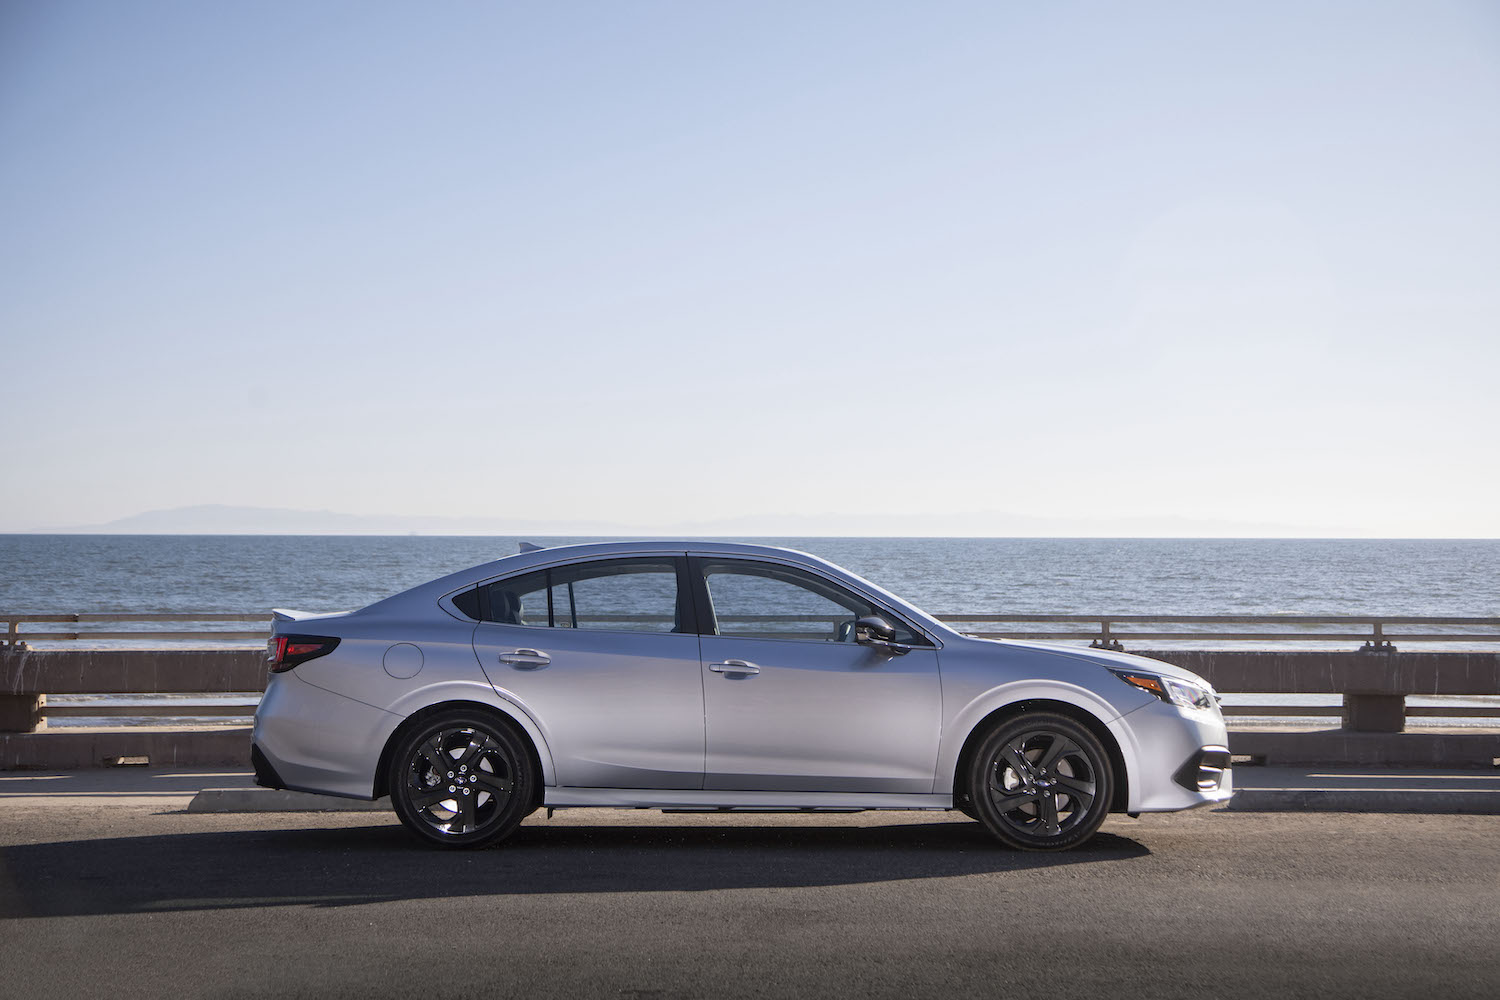 2021 Subaru Legacy parked by the water